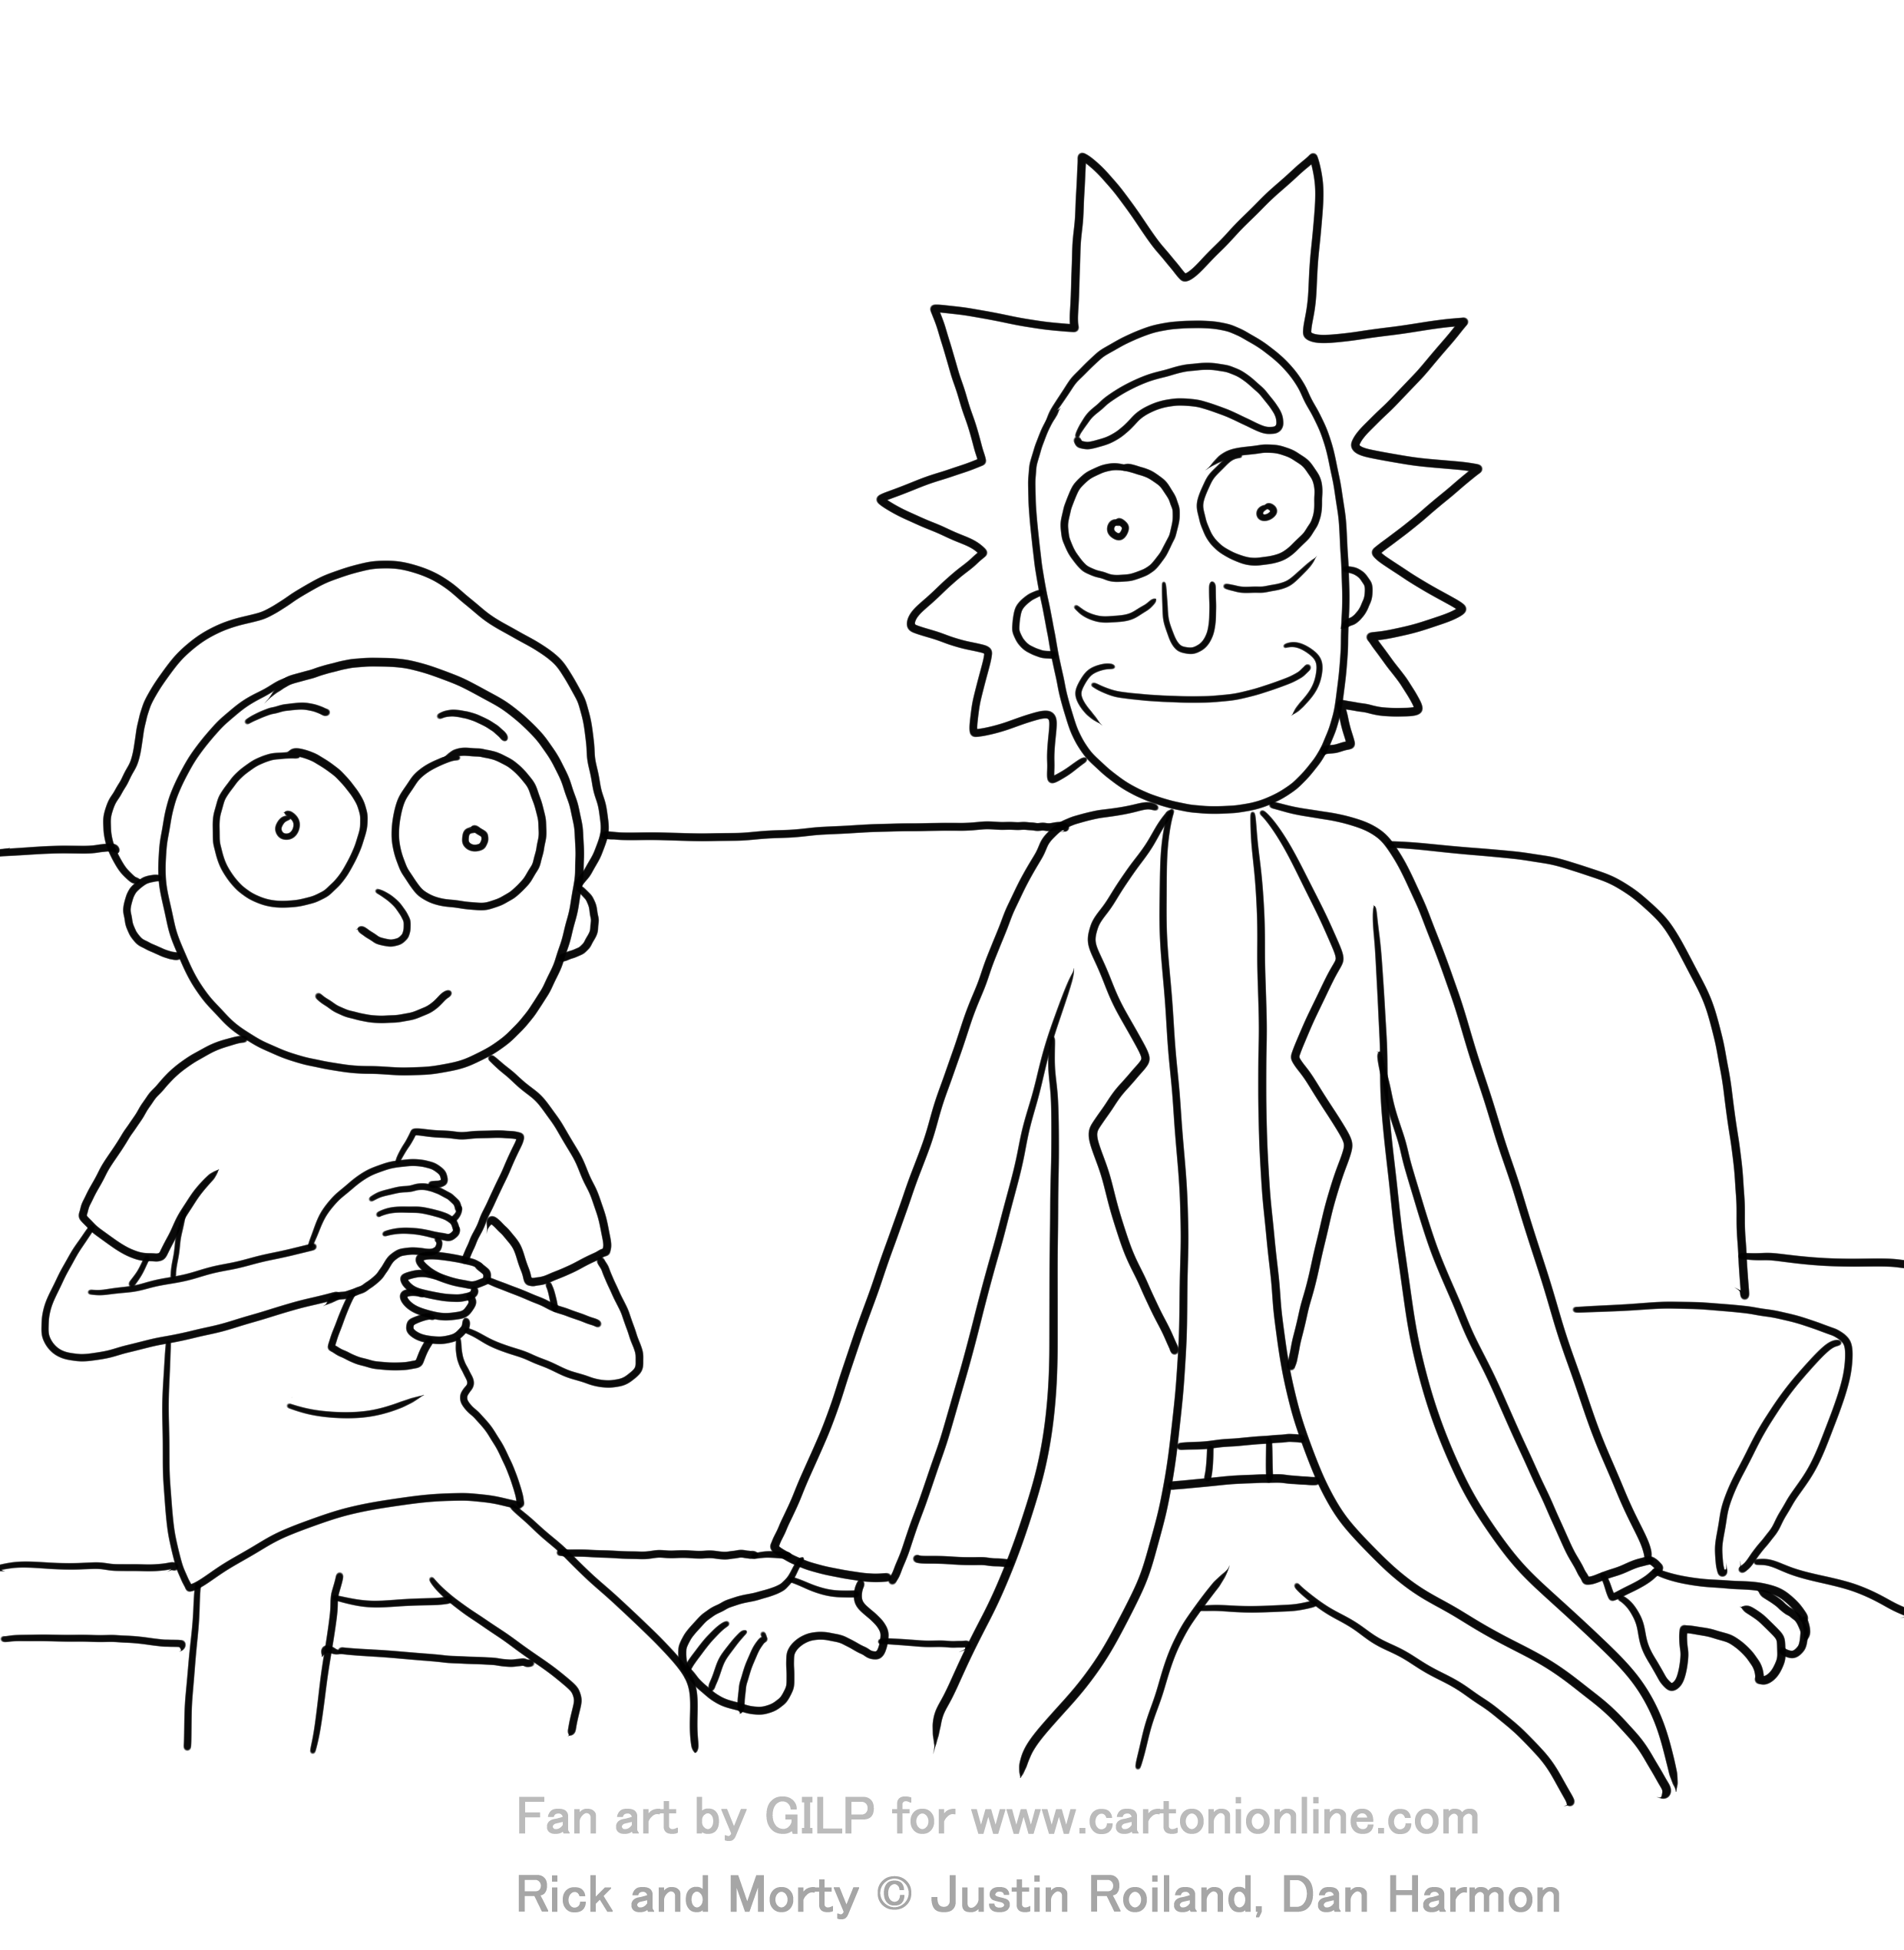 Rick and Morty 03 from Rick and Morty coloring pages to print and coloring